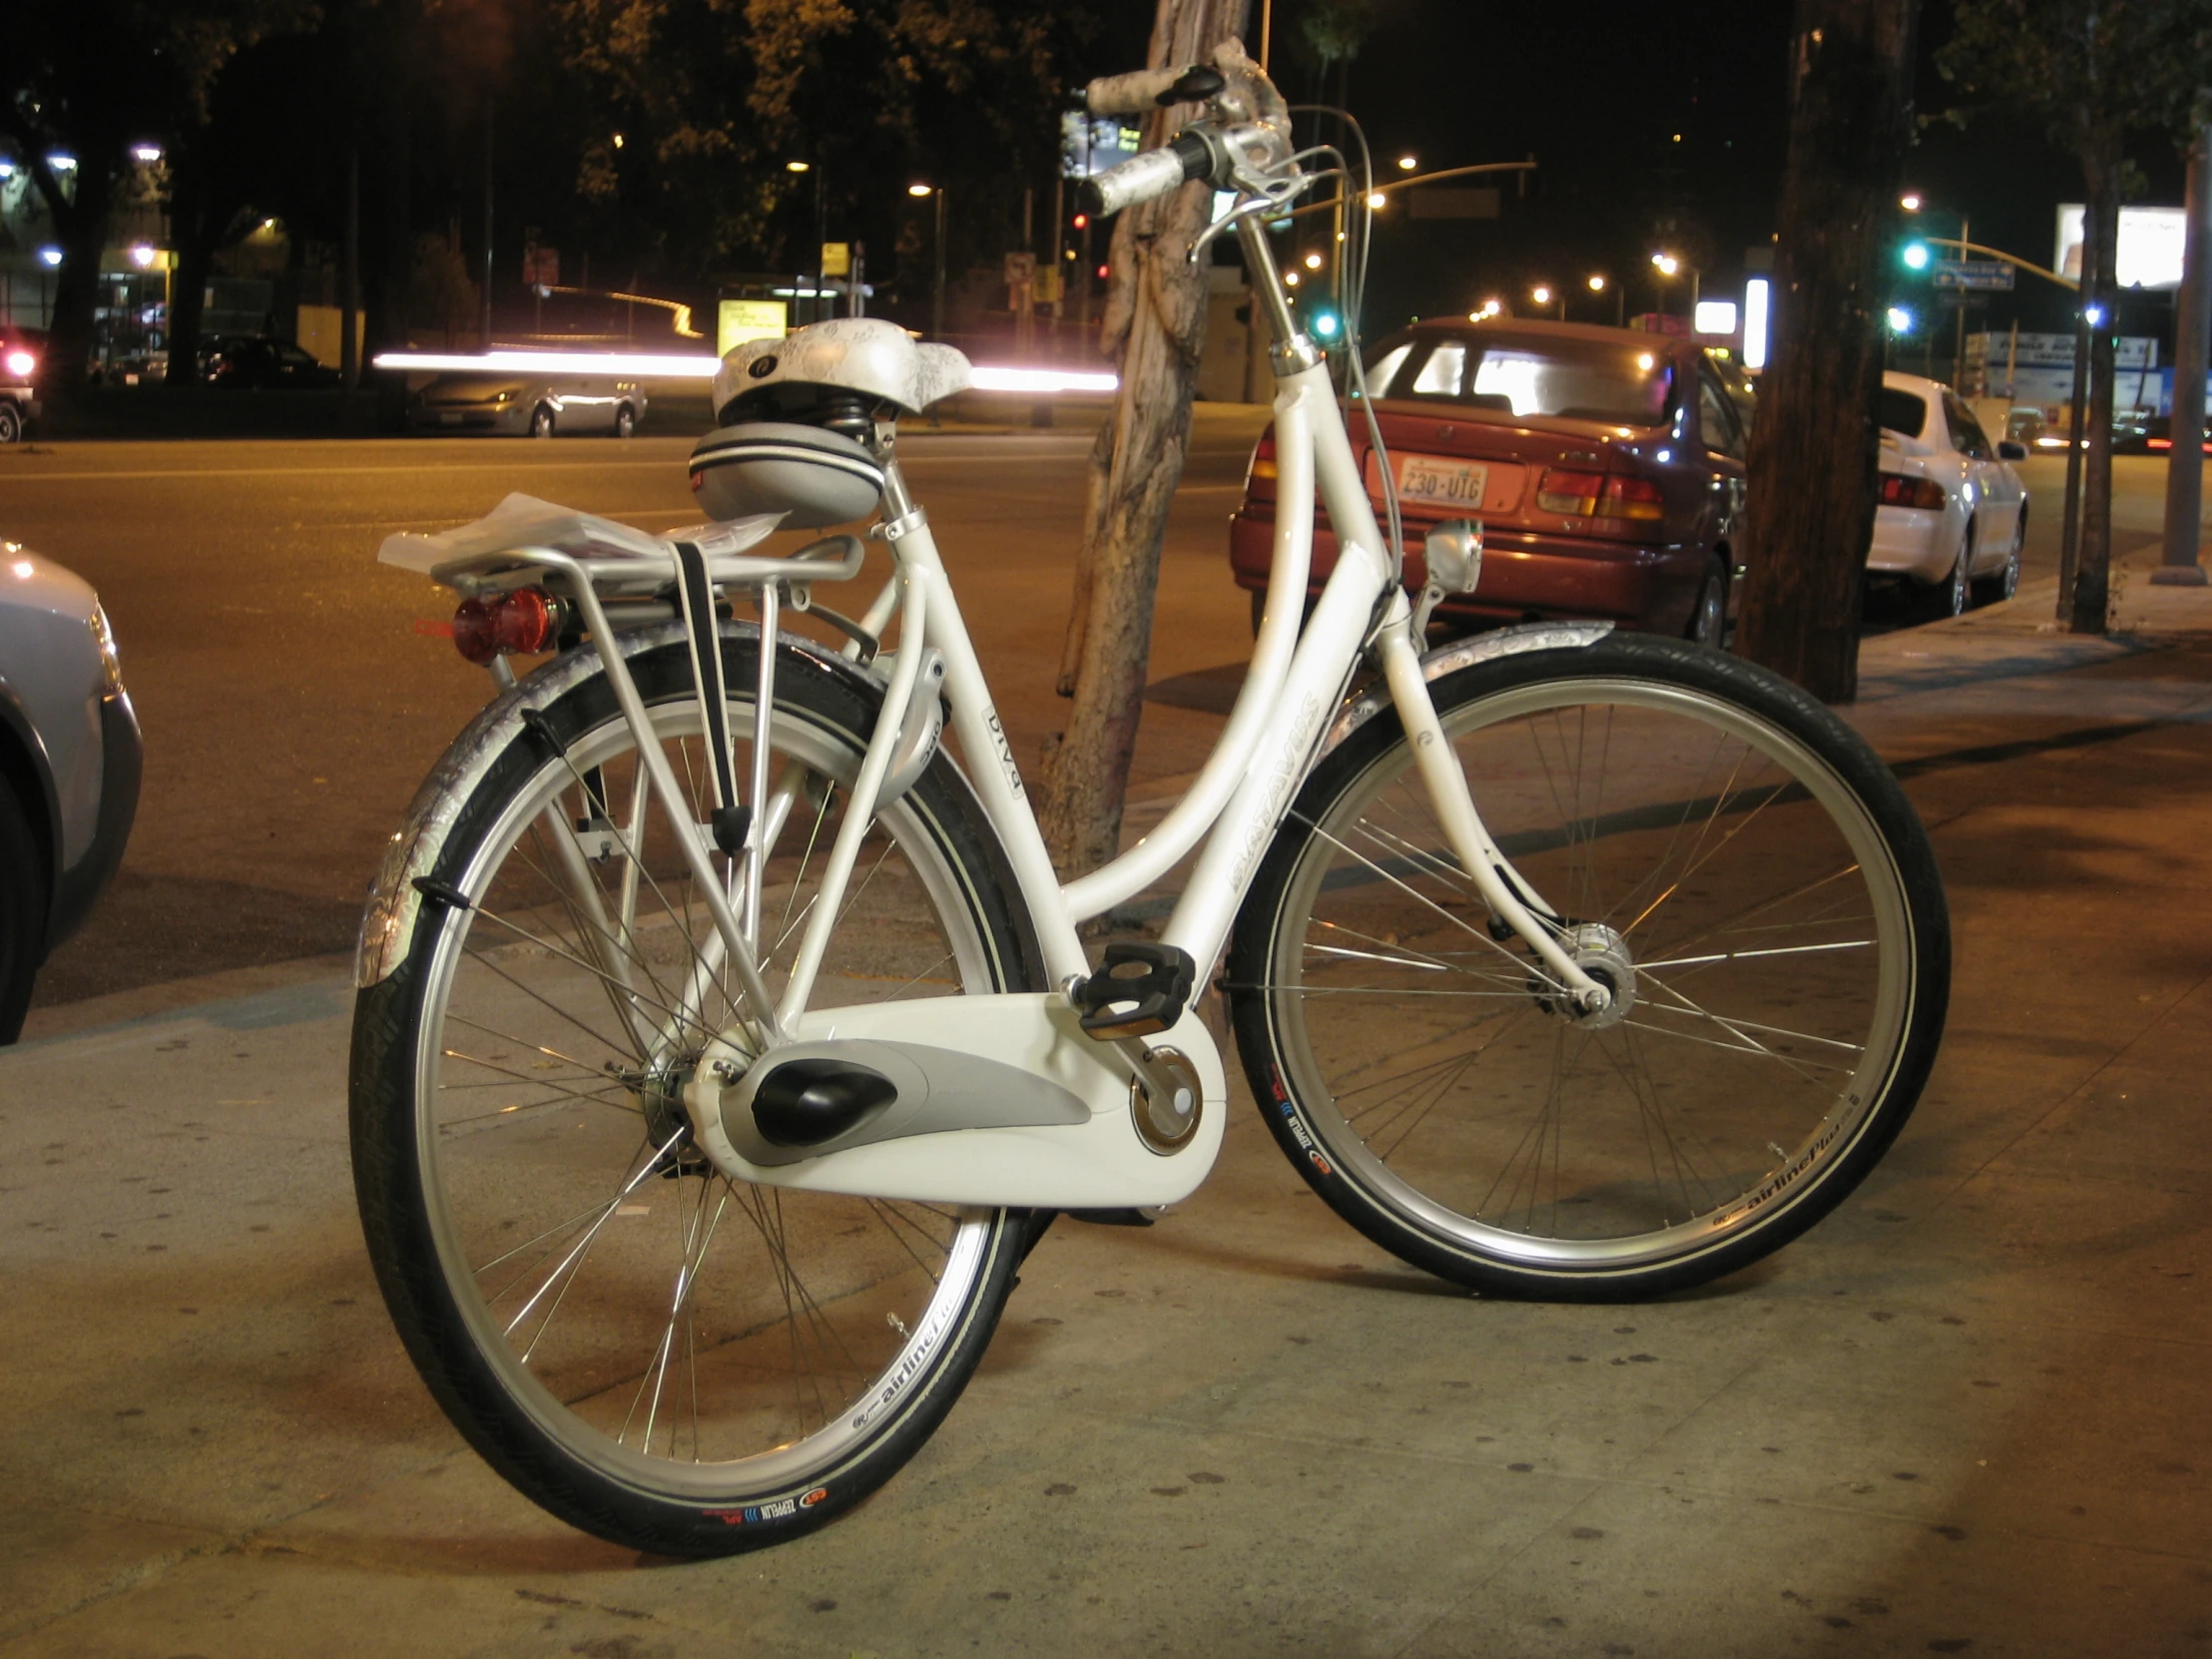 a bicycle on a city street at night